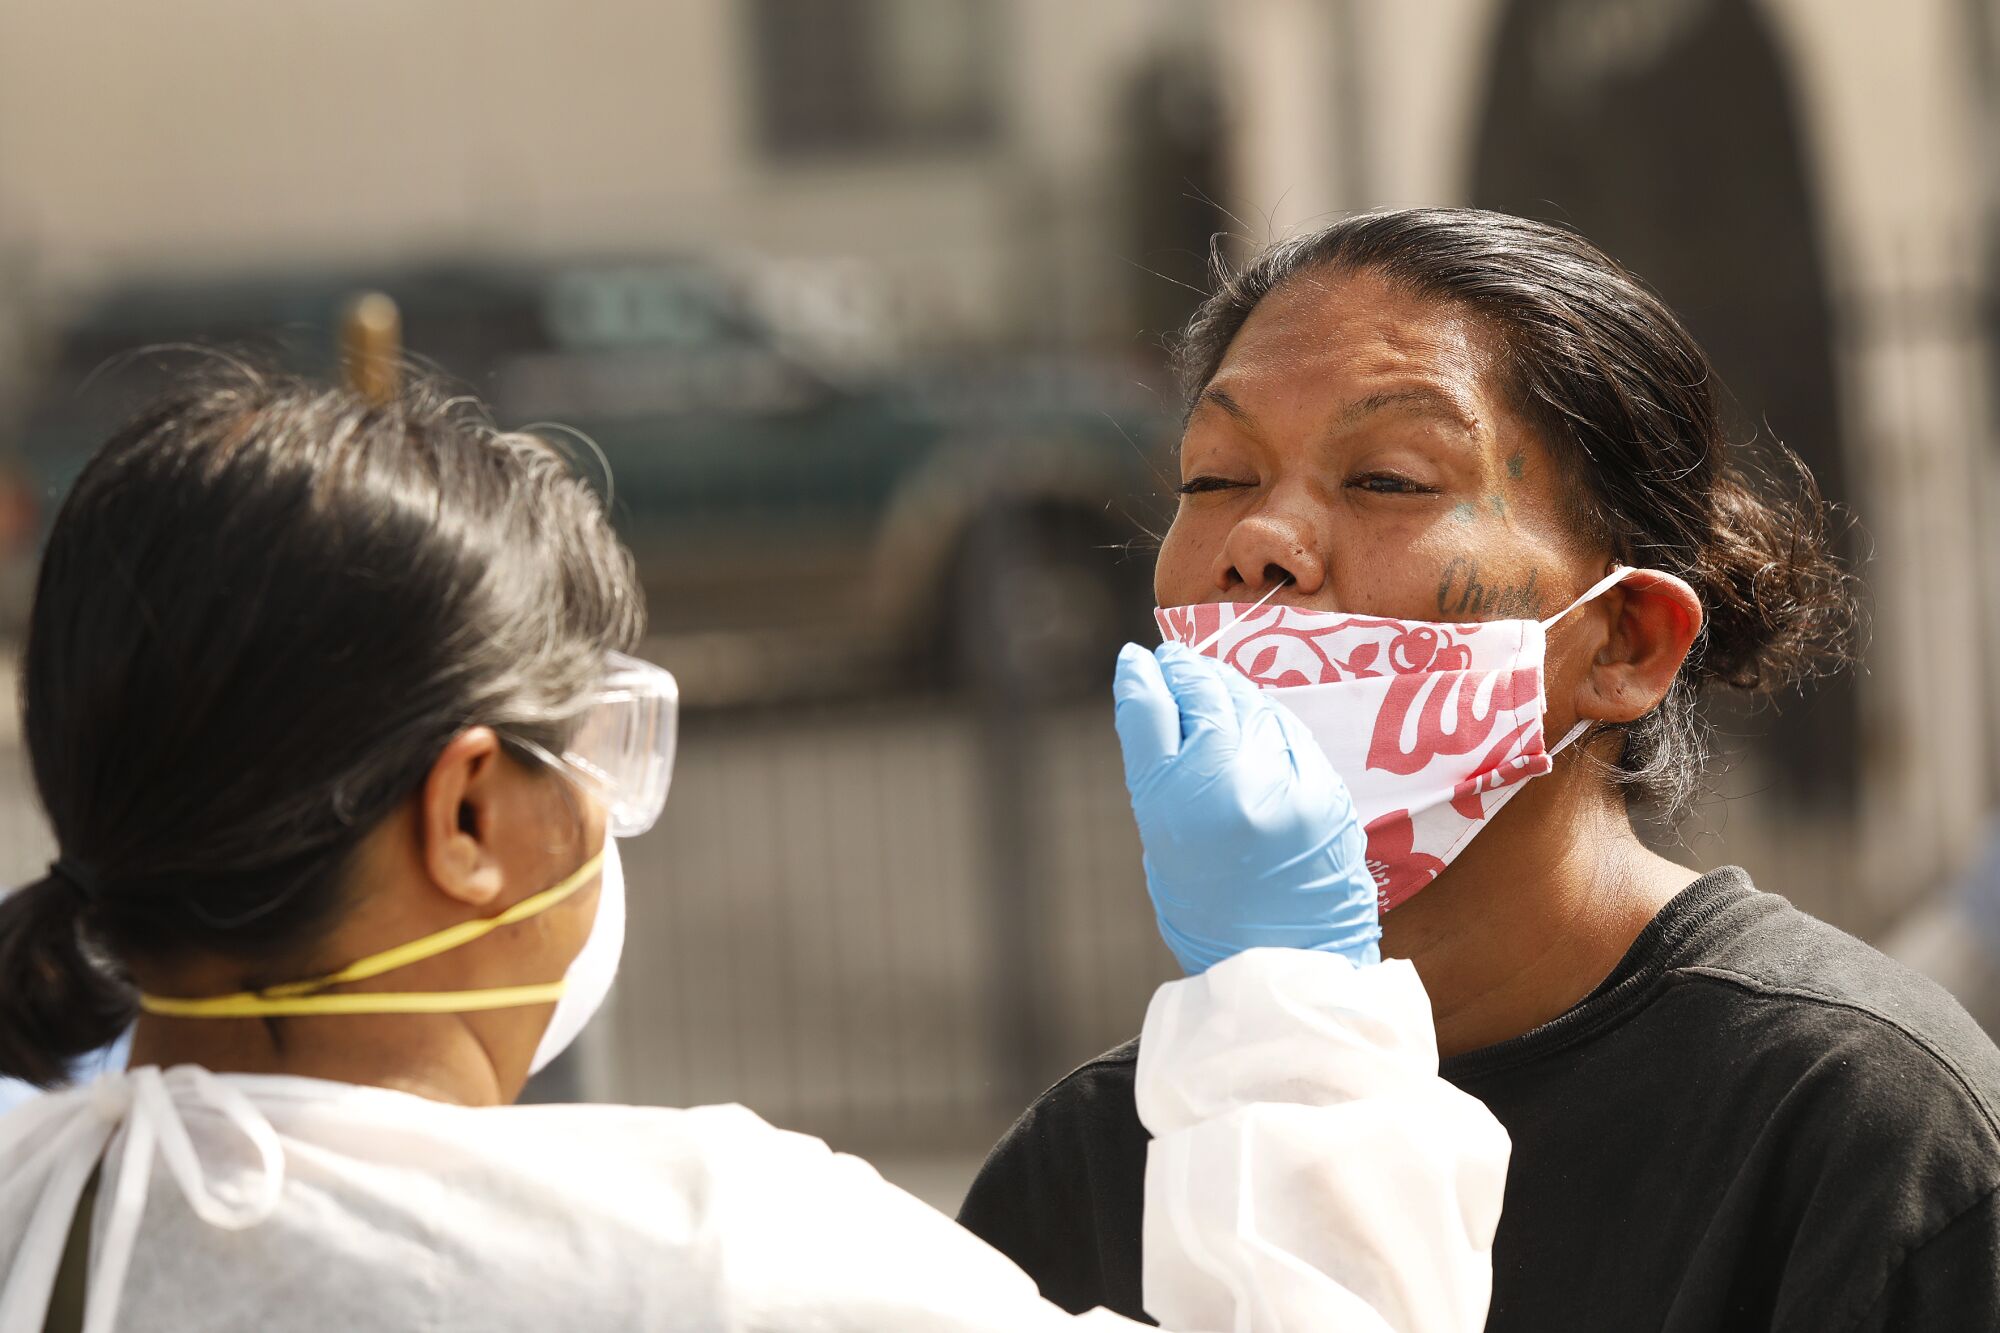 Fatima, who is homeless and living on skid row in downtown Los Angeles, gets tested for the coronavirus 